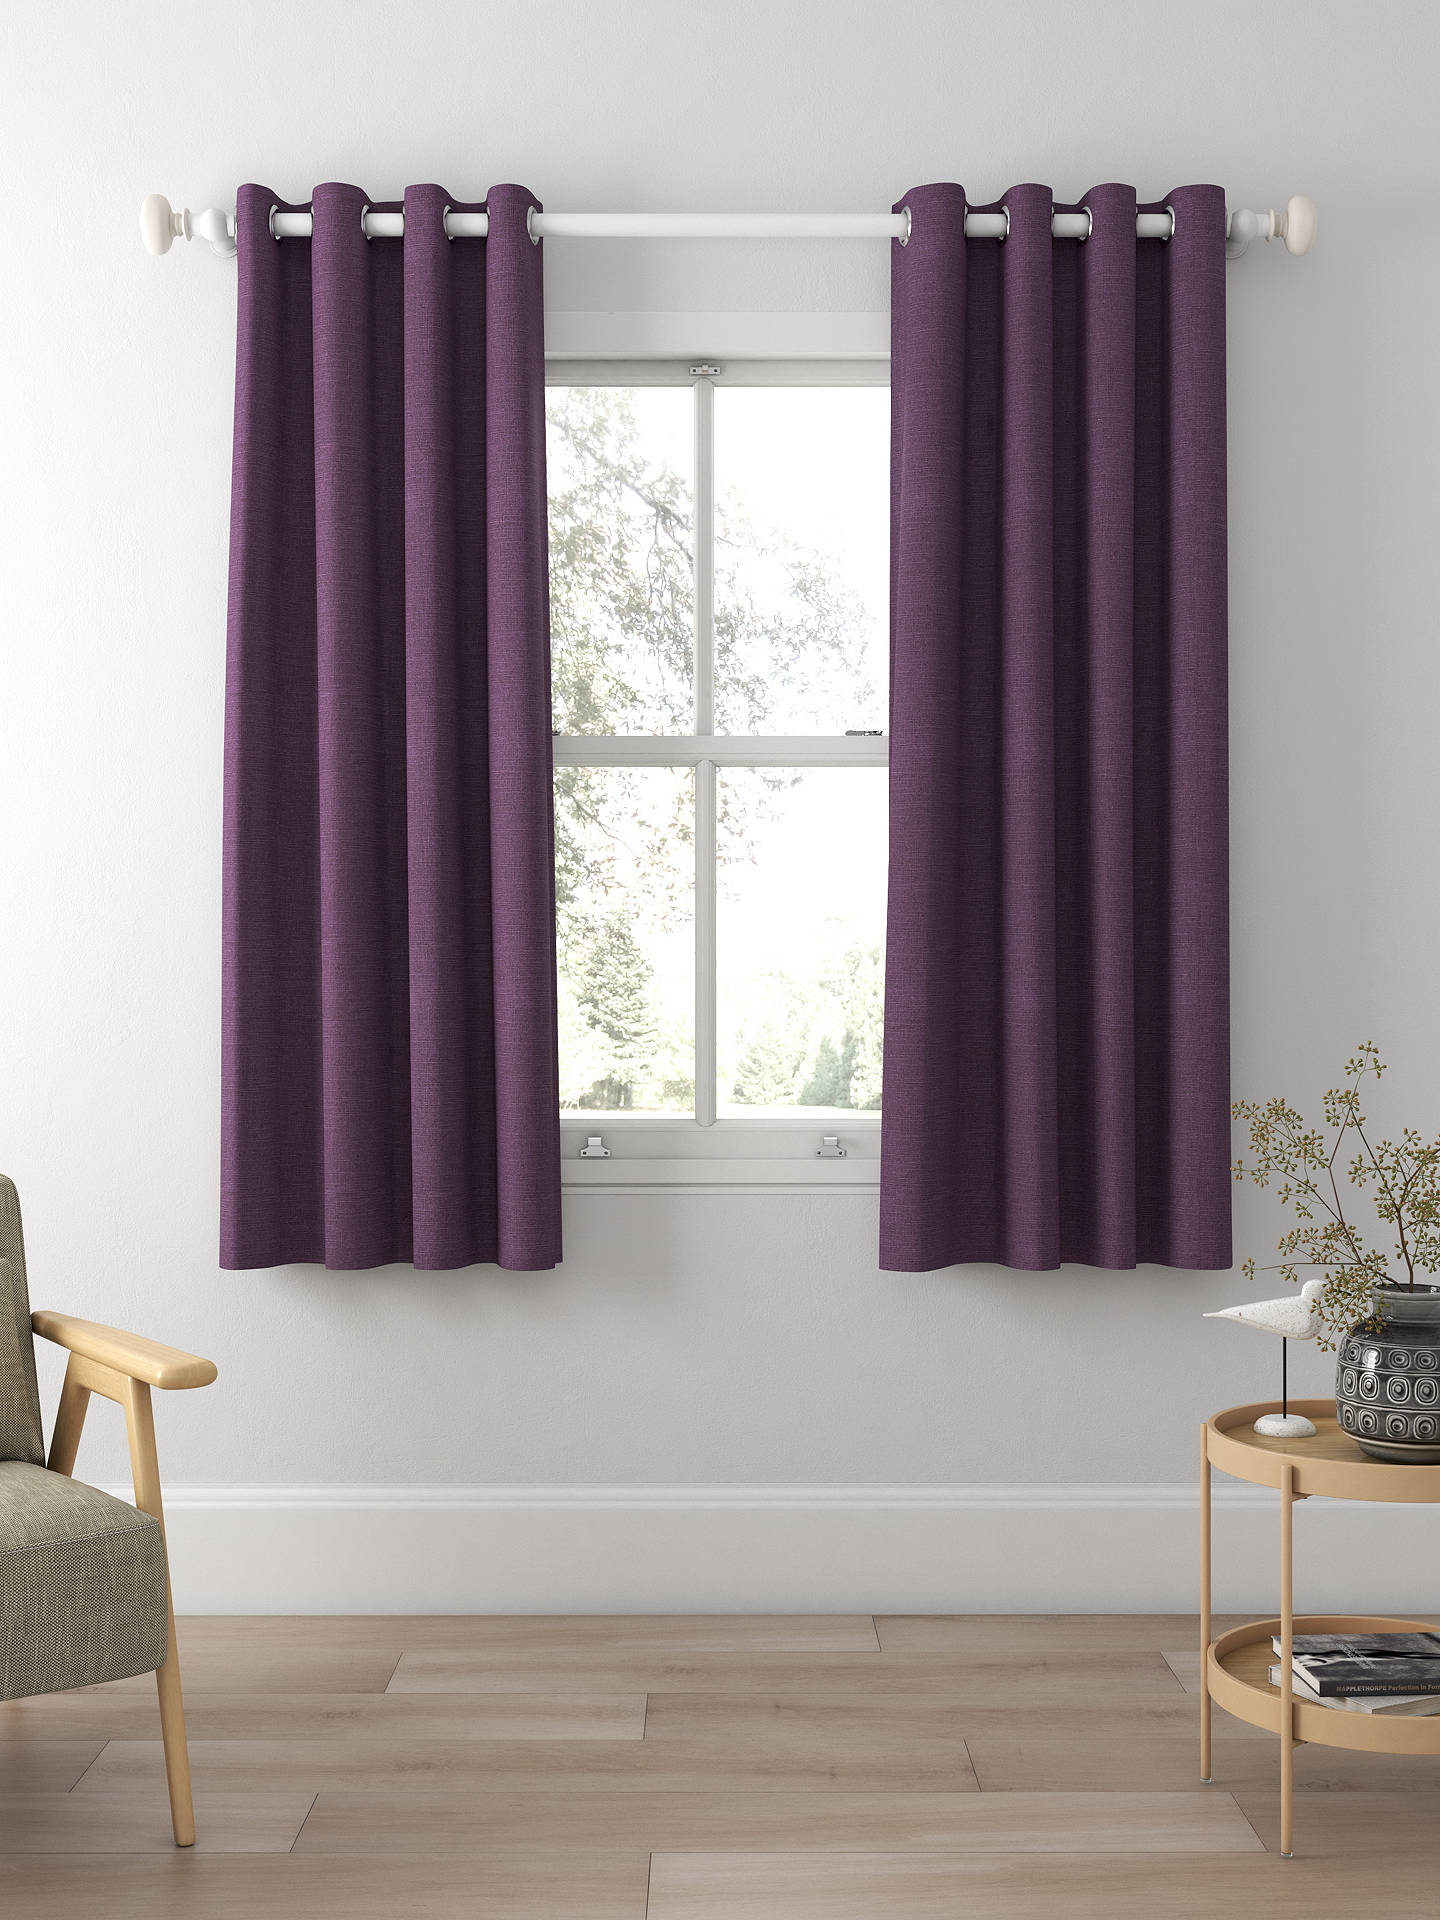 Sanderson Tuscany II Made to Measure Curtains, Thistle